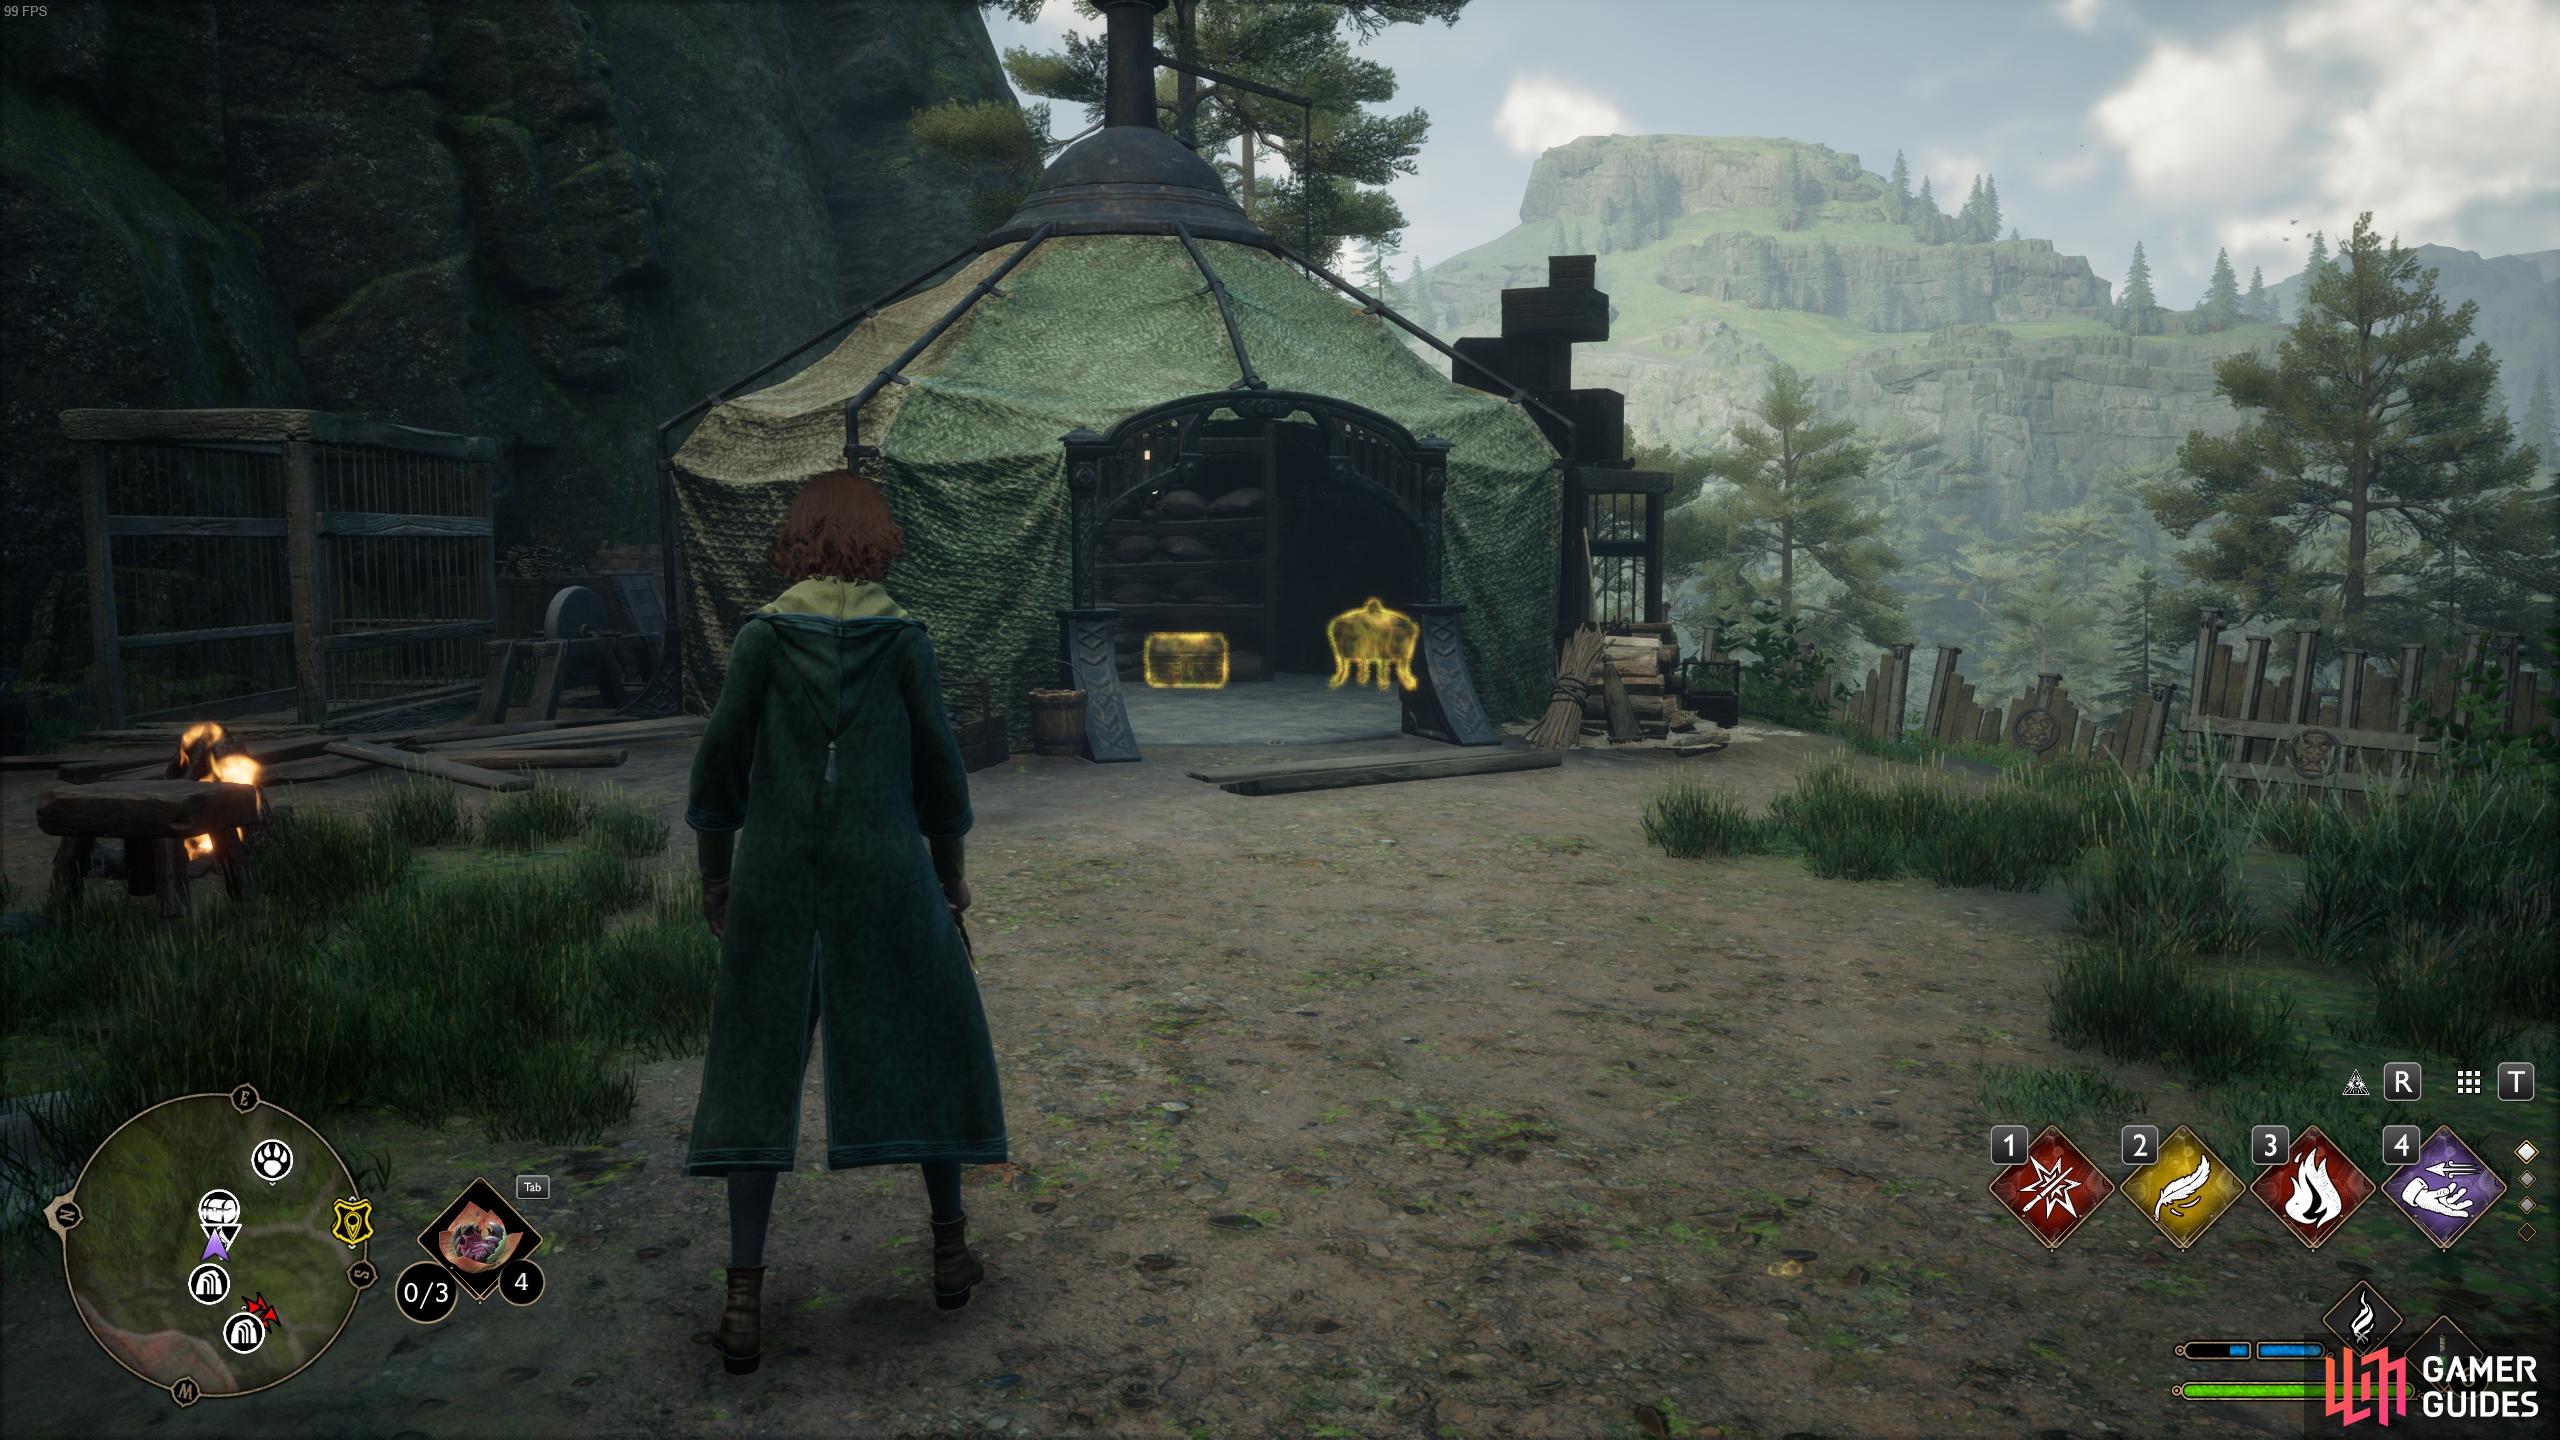 You'll find this Collection Chest inside the tent here.